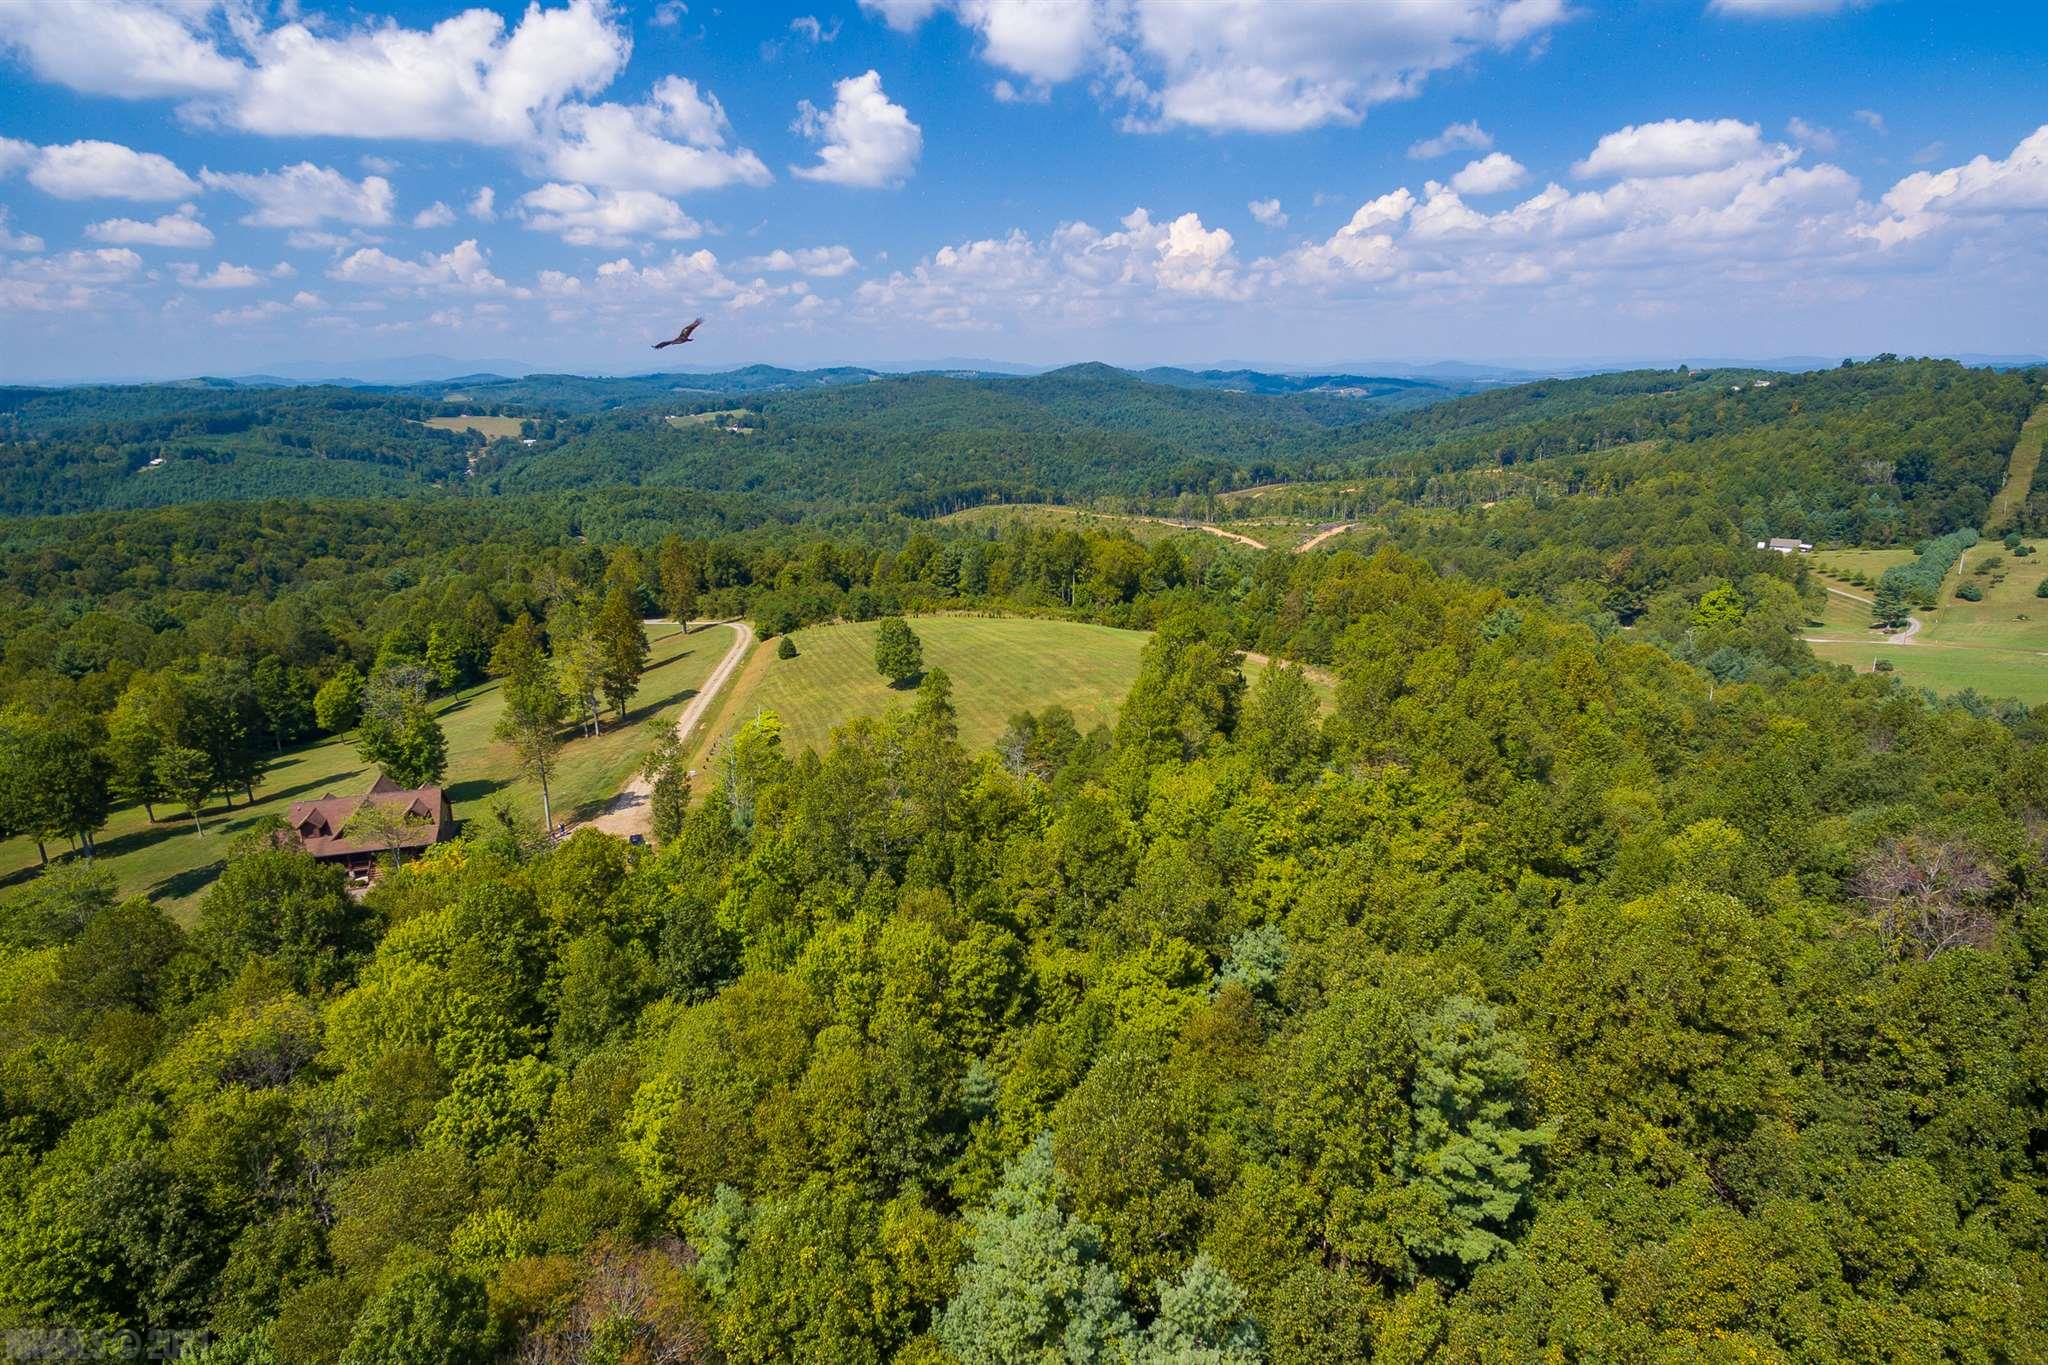 This is an incredible 5 acre wooded parcel. You have a great long range view of the mountains, as well as the ability to watch the sunset over the mountains. With the lot being wooded, you get to decide how much privacy you have with that incredible view! Currently there is only one home in this development. There are plenty of potential building sites. This lot is priced well below tax assessment, and is ready for your dream mountain getaway! You are plenty secluded, but only 15 minutes to amenities and downtown Galax. You're just a short drive to the New River Trail, New River, and plenty of hiking trails. Call today for your chance to see it!